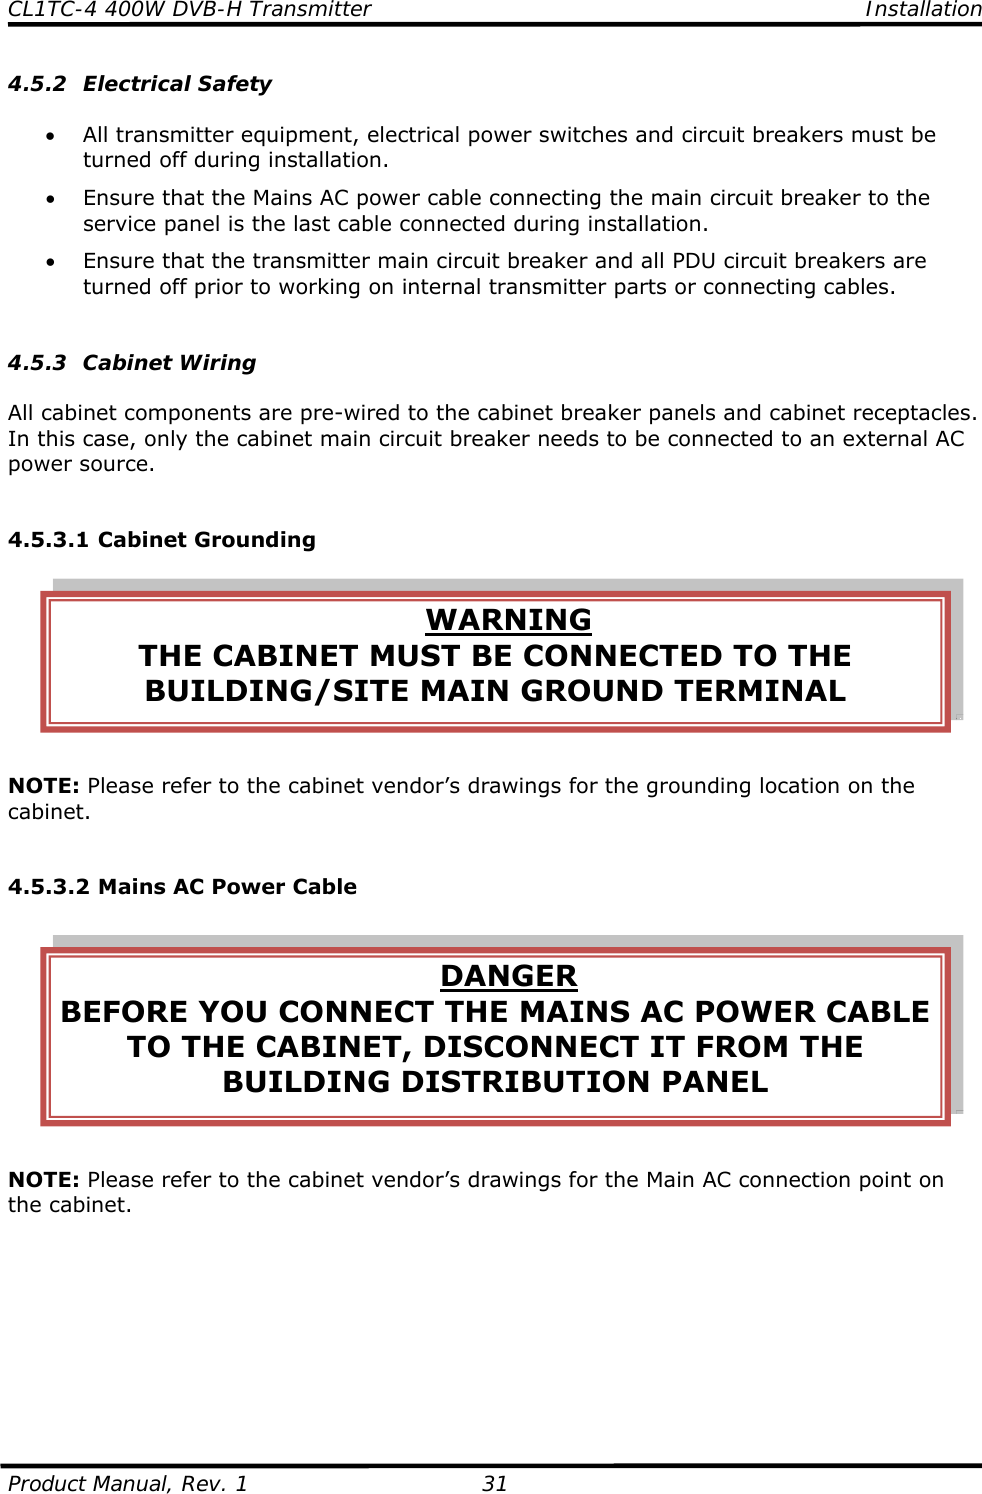 CL1TC-4 400W DVB-H Transmitter    Installation  Product Manual, Rev. 1  31 4.5.2 Electrical Safety  • All transmitter equipment, electrical power switches and circuit breakers must be turned off during installation. • Ensure that the Mains AC power cable connecting the main circuit breaker to the service panel is the last cable connected during installation. • Ensure that the transmitter main circuit breaker and all PDU circuit breakers are turned off prior to working on internal transmitter parts or connecting cables.   4.5.3 Cabinet Wiring  All cabinet components are pre-wired to the cabinet breaker panels and cabinet receptacles.  In this case, only the cabinet main circuit breaker needs to be connected to an external AC power source.   4.5.3.1 Cabinet Grounding  NOTE: Please refer to the cabinet vendor’s drawings for the grounding location on the cabinet.   4.5.3.2 Mains AC Power Cable  NOTE: Please refer to the cabinet vendor’s drawings for the Main AC connection point on the cabinet.         WARNING THE CABINET MUST BE CONNECTED TO THE BUILDING/SITE MAIN GROUND TERMINAL DANGER BEFORE YOU CONNECT THE MAINS AC POWER CABLE TO THE CABINET, DISCONNECT IT FROM THE BUILDING DISTRIBUTION PANEL 